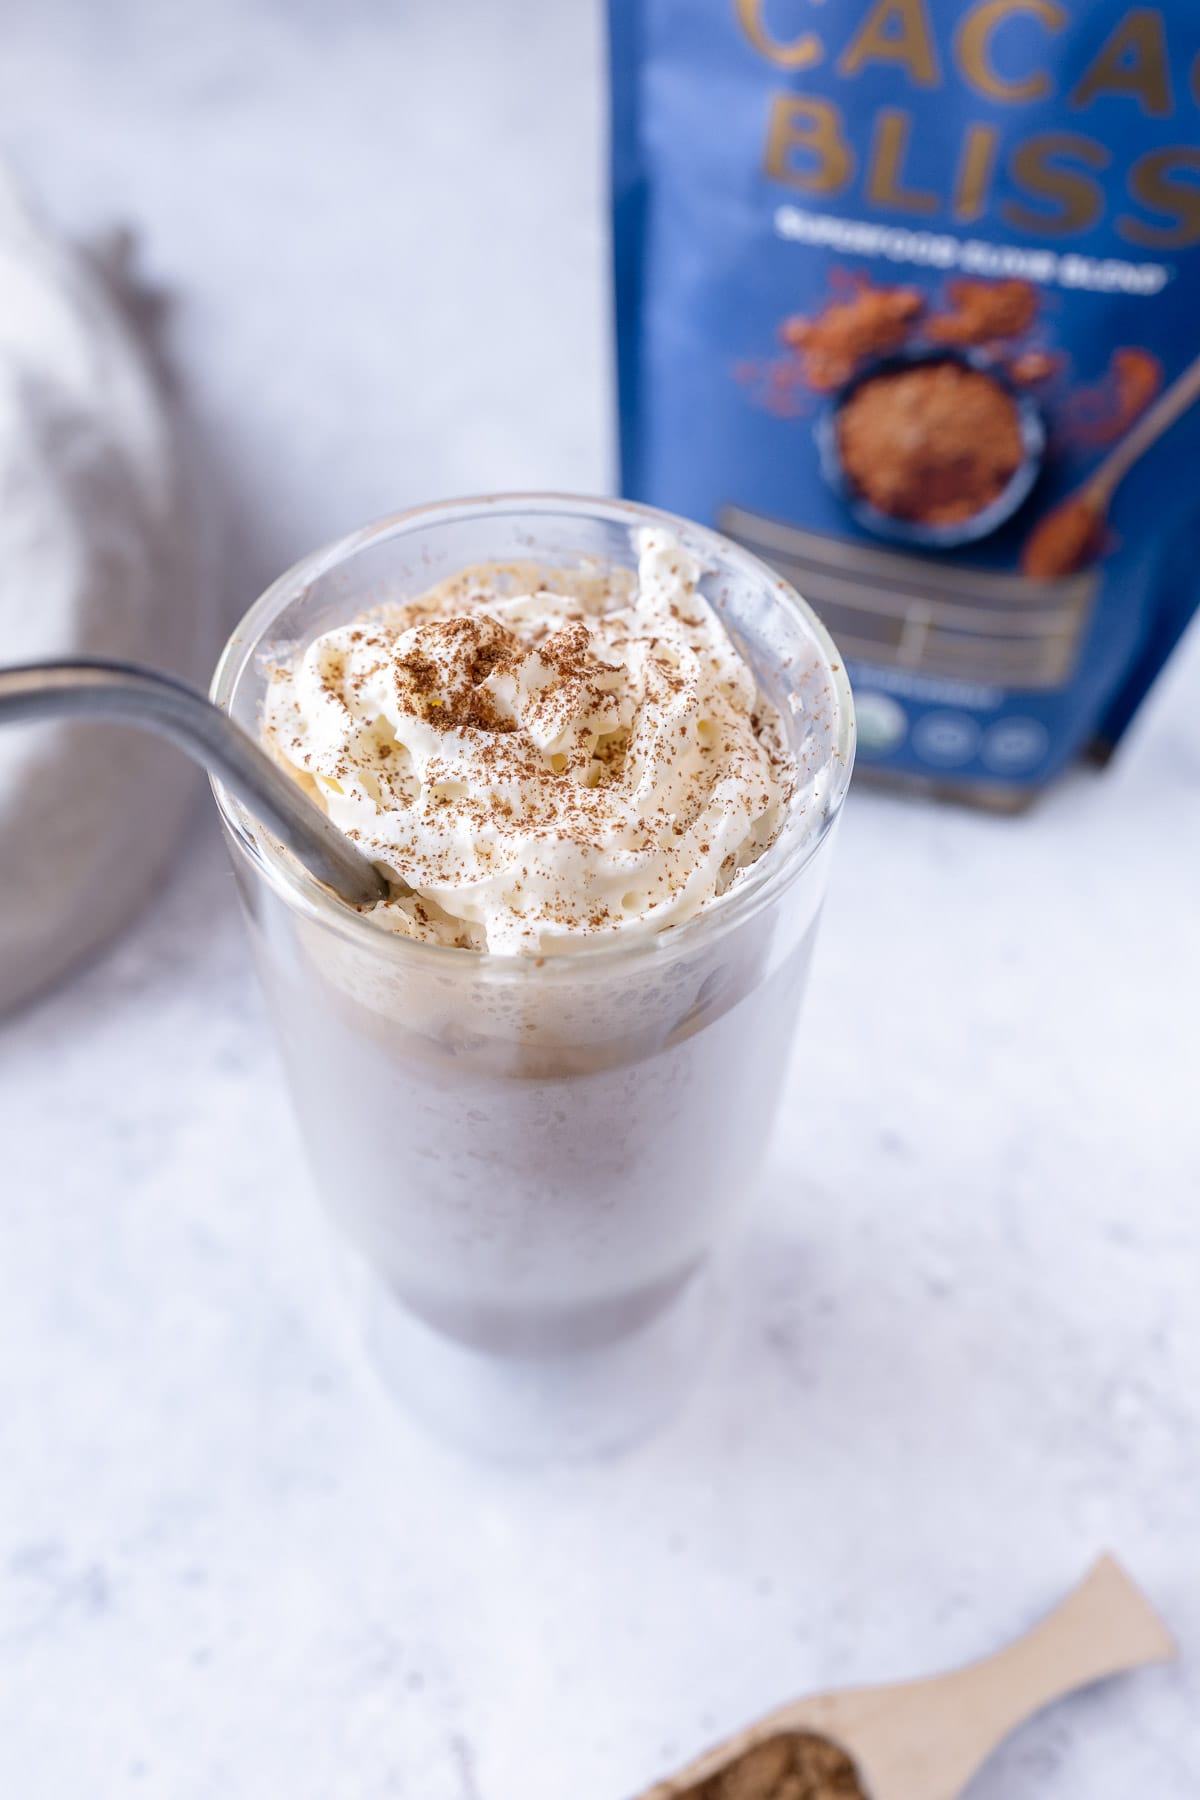 a side view of a tall clear glass filled with peanut butter cup latte topped with coconut whipped cream and dusting of earth echo cacao bliss powder.